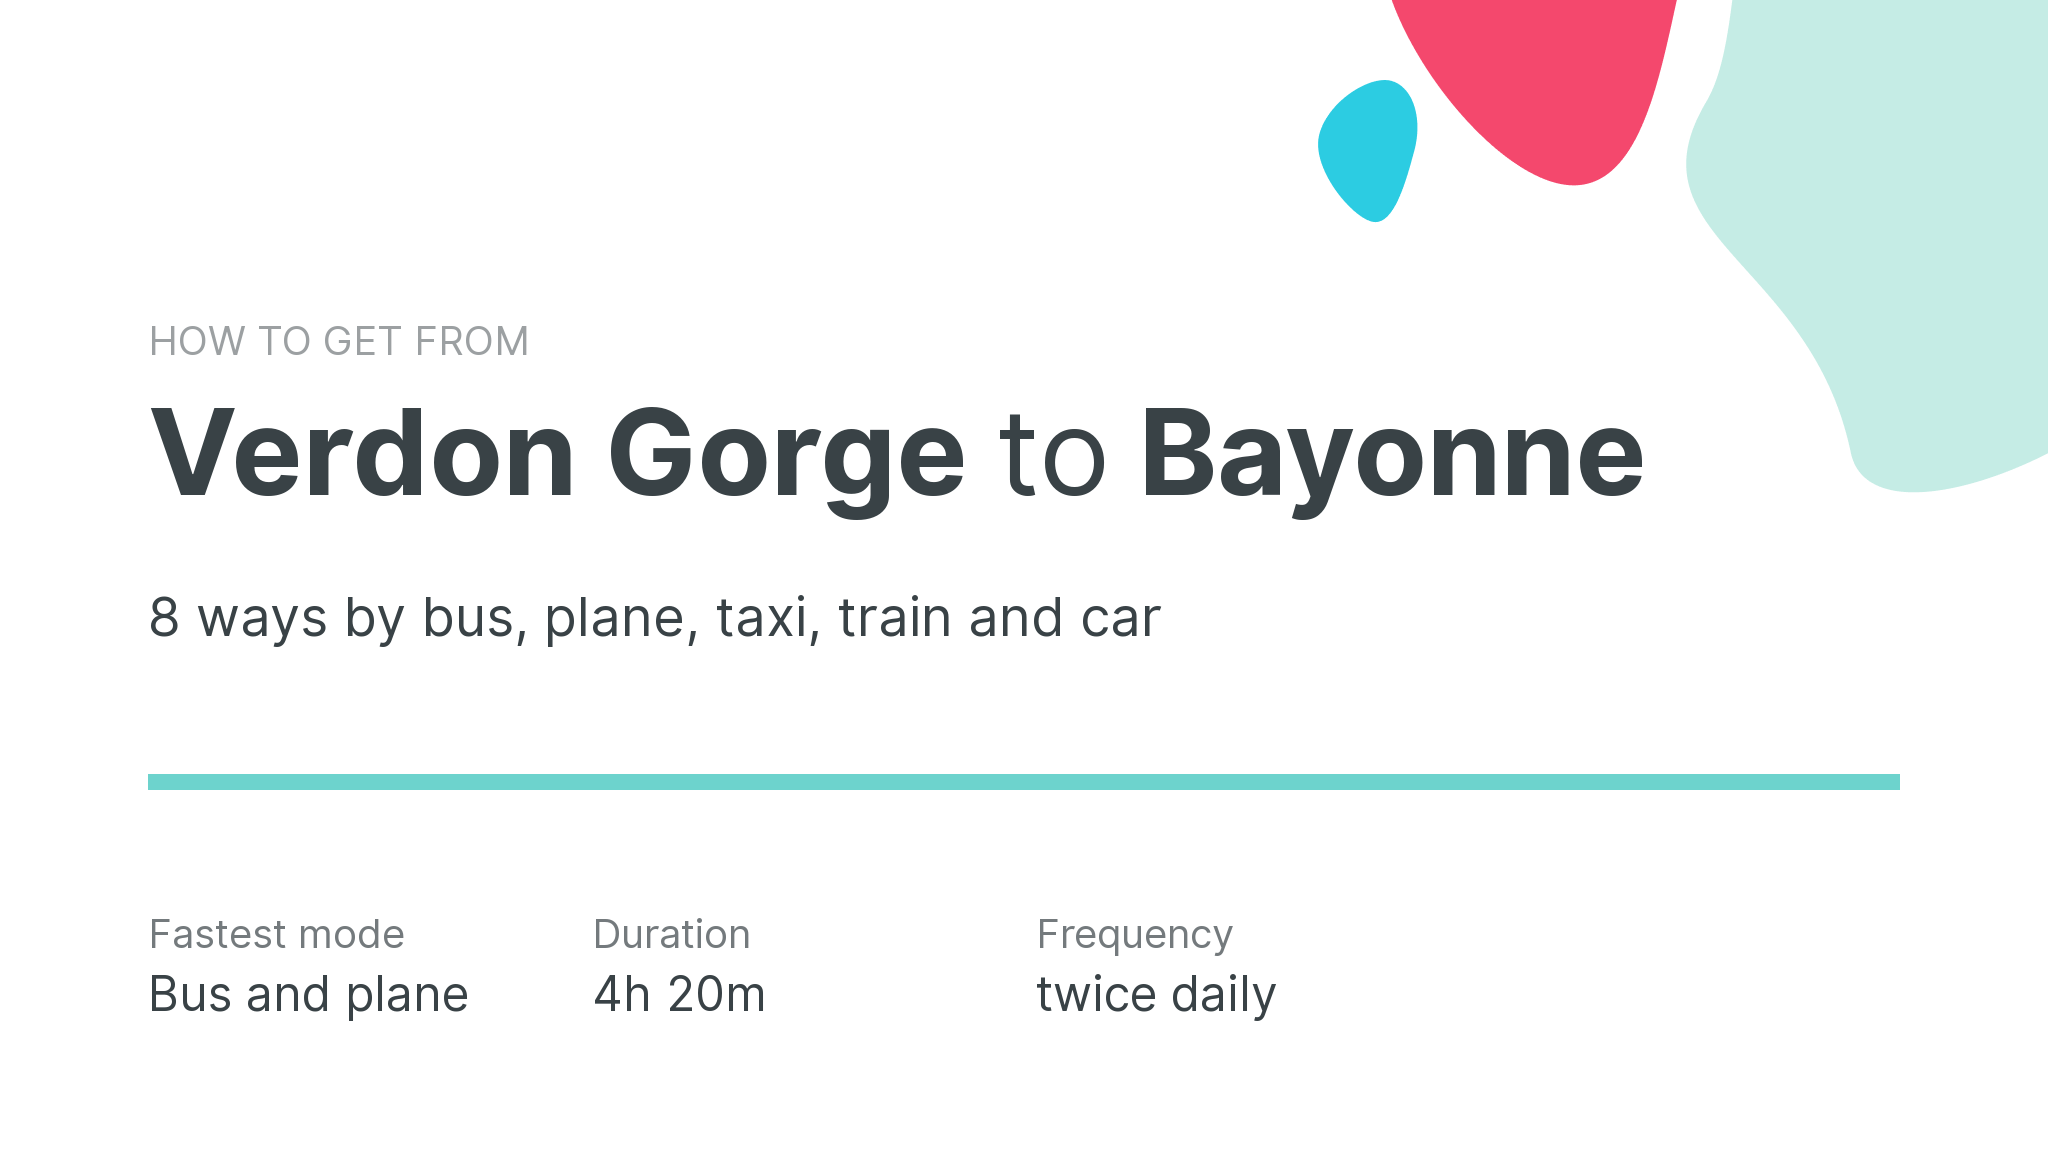 How do I get from Verdon Gorge to Bayonne